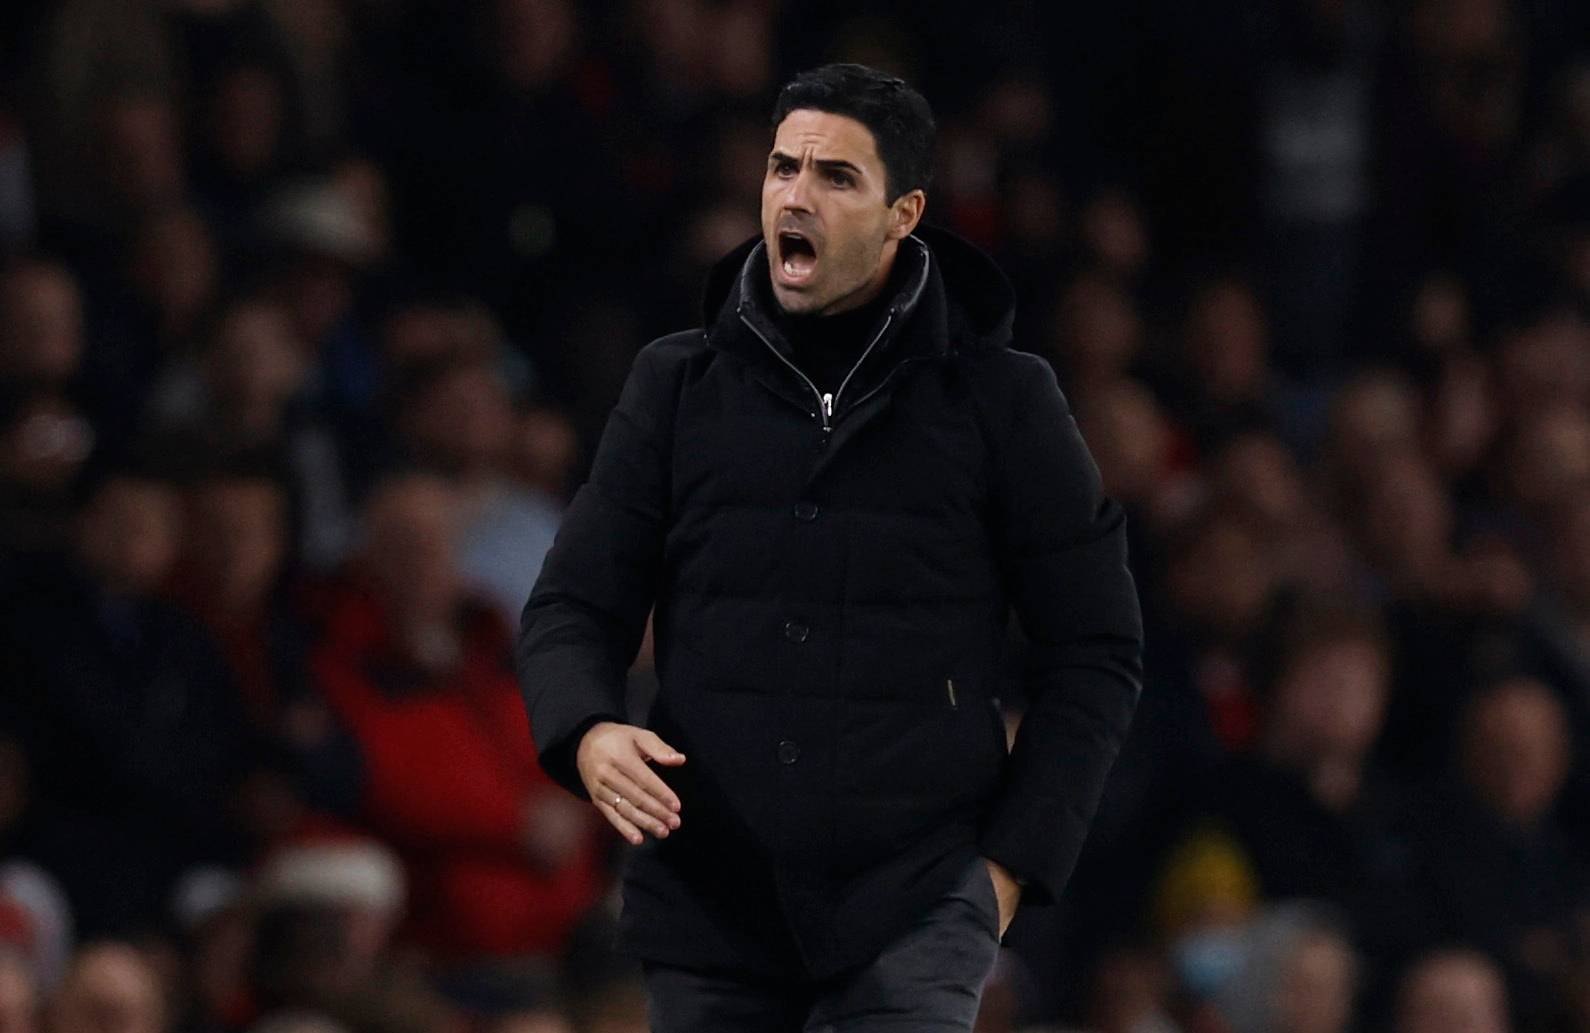 Mikel Arteta on the touchline during Arsenal's Europa League clash against FC Zurich